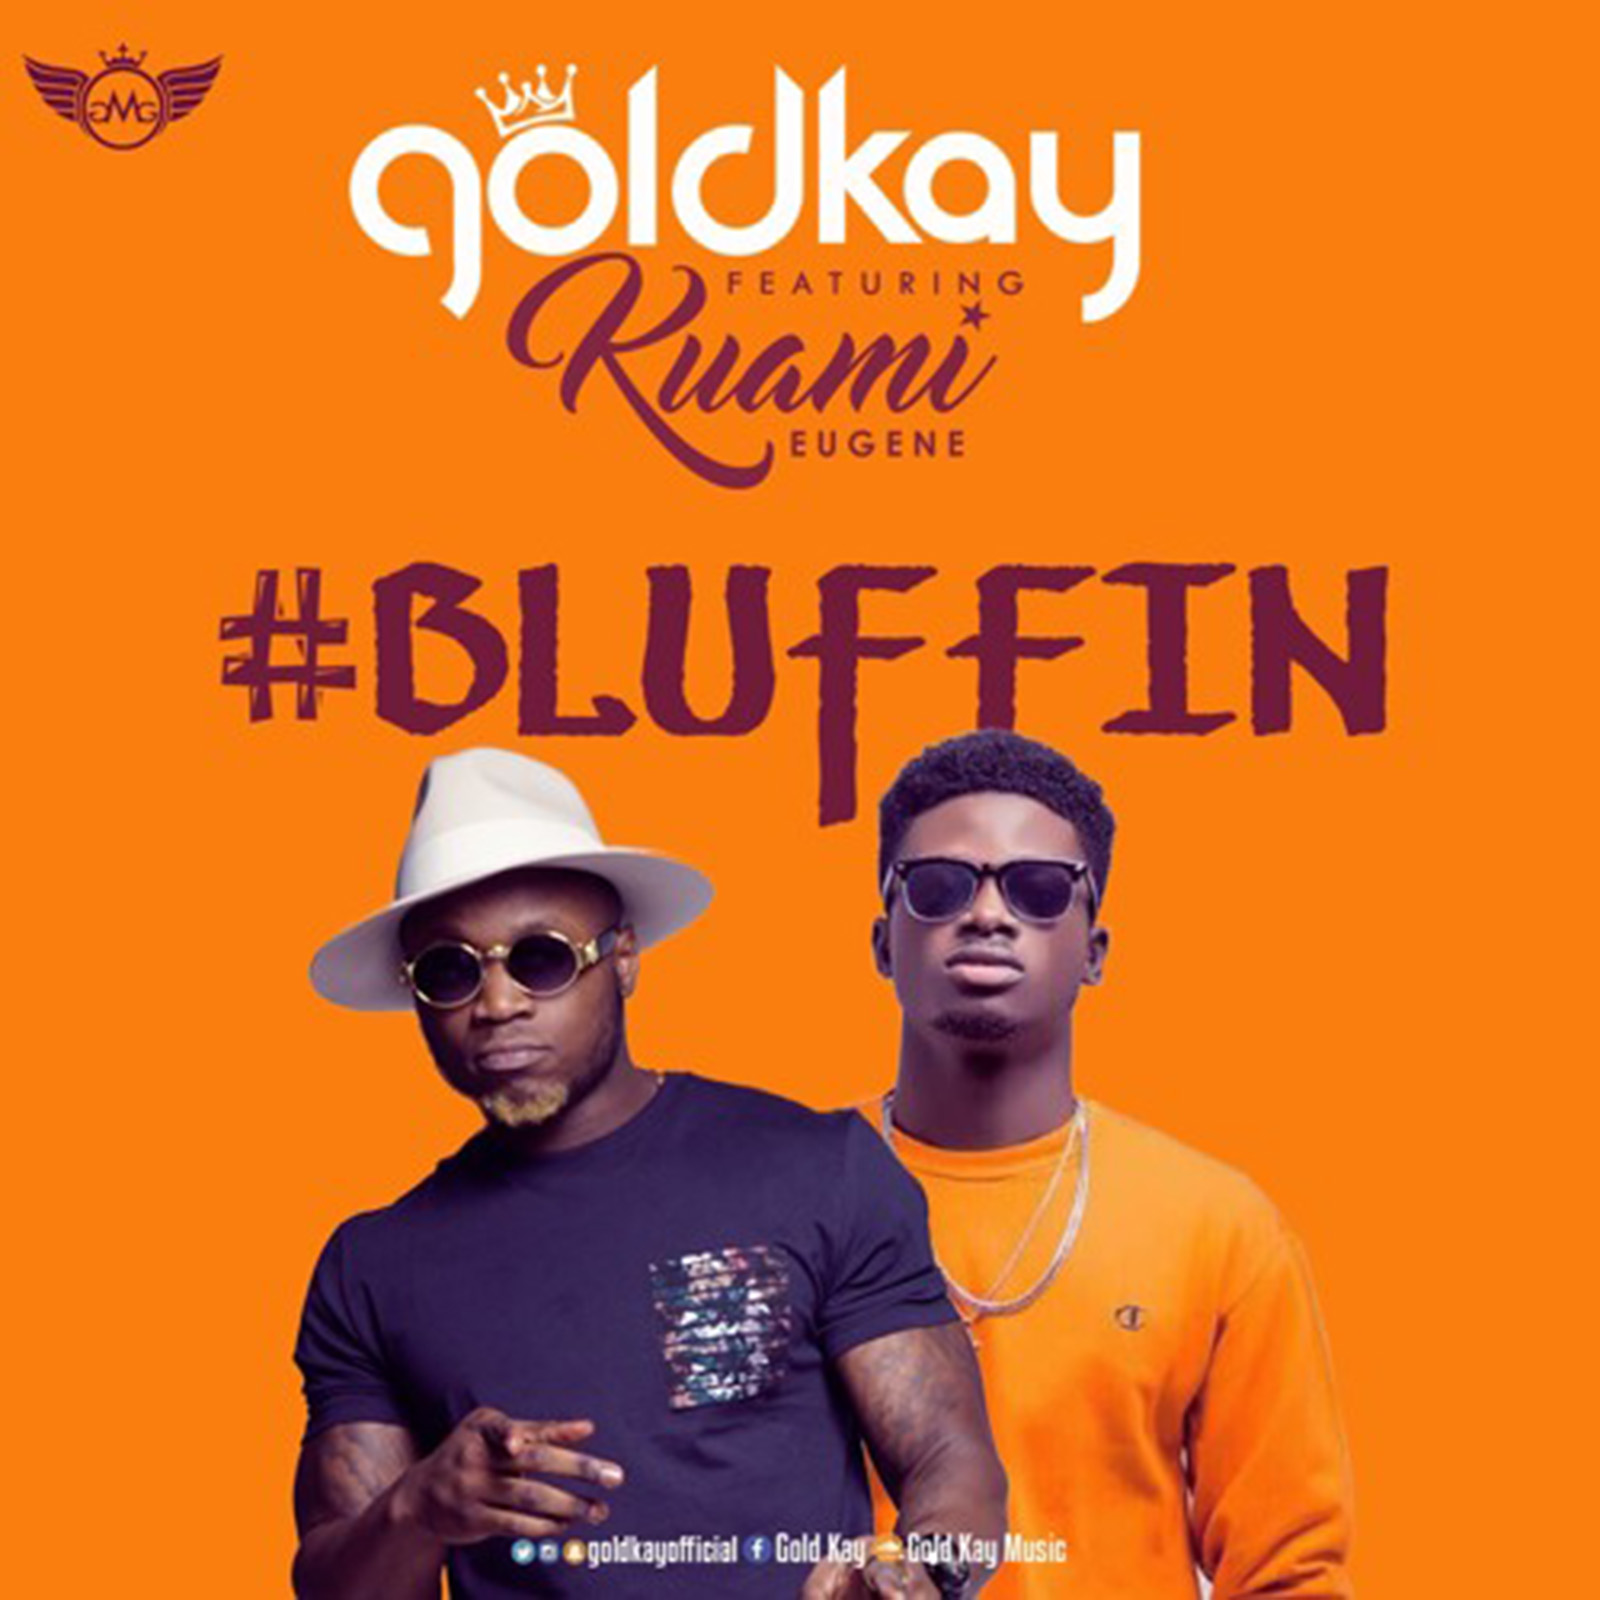 Bluffin by GoldKay feat. Kuami Eugene